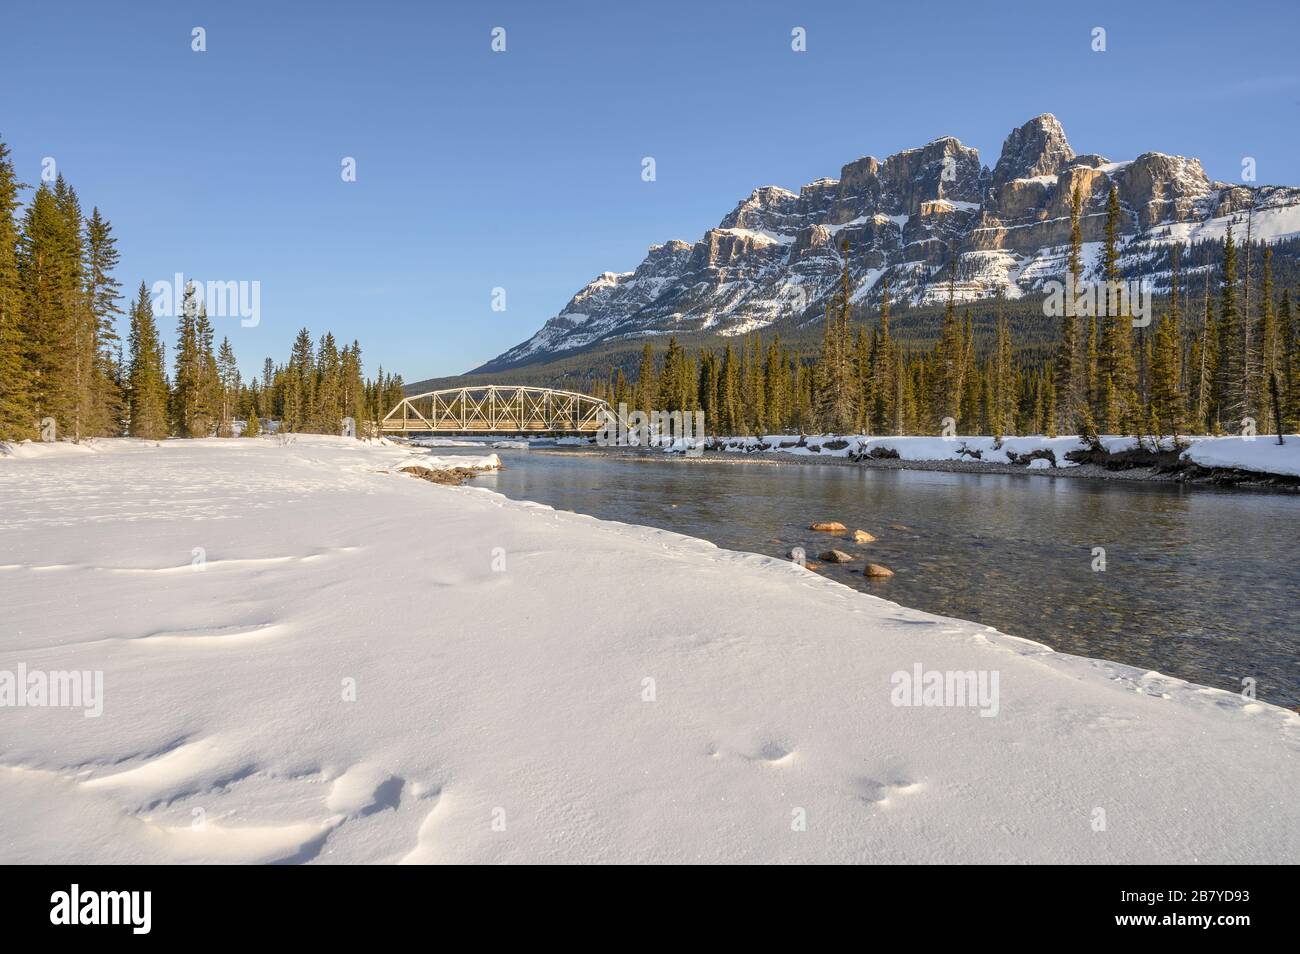 Winter view of the steel truss bridge over the Bow River at Castle Junction in Banff National Park, Alberta, Canada Stock Photo